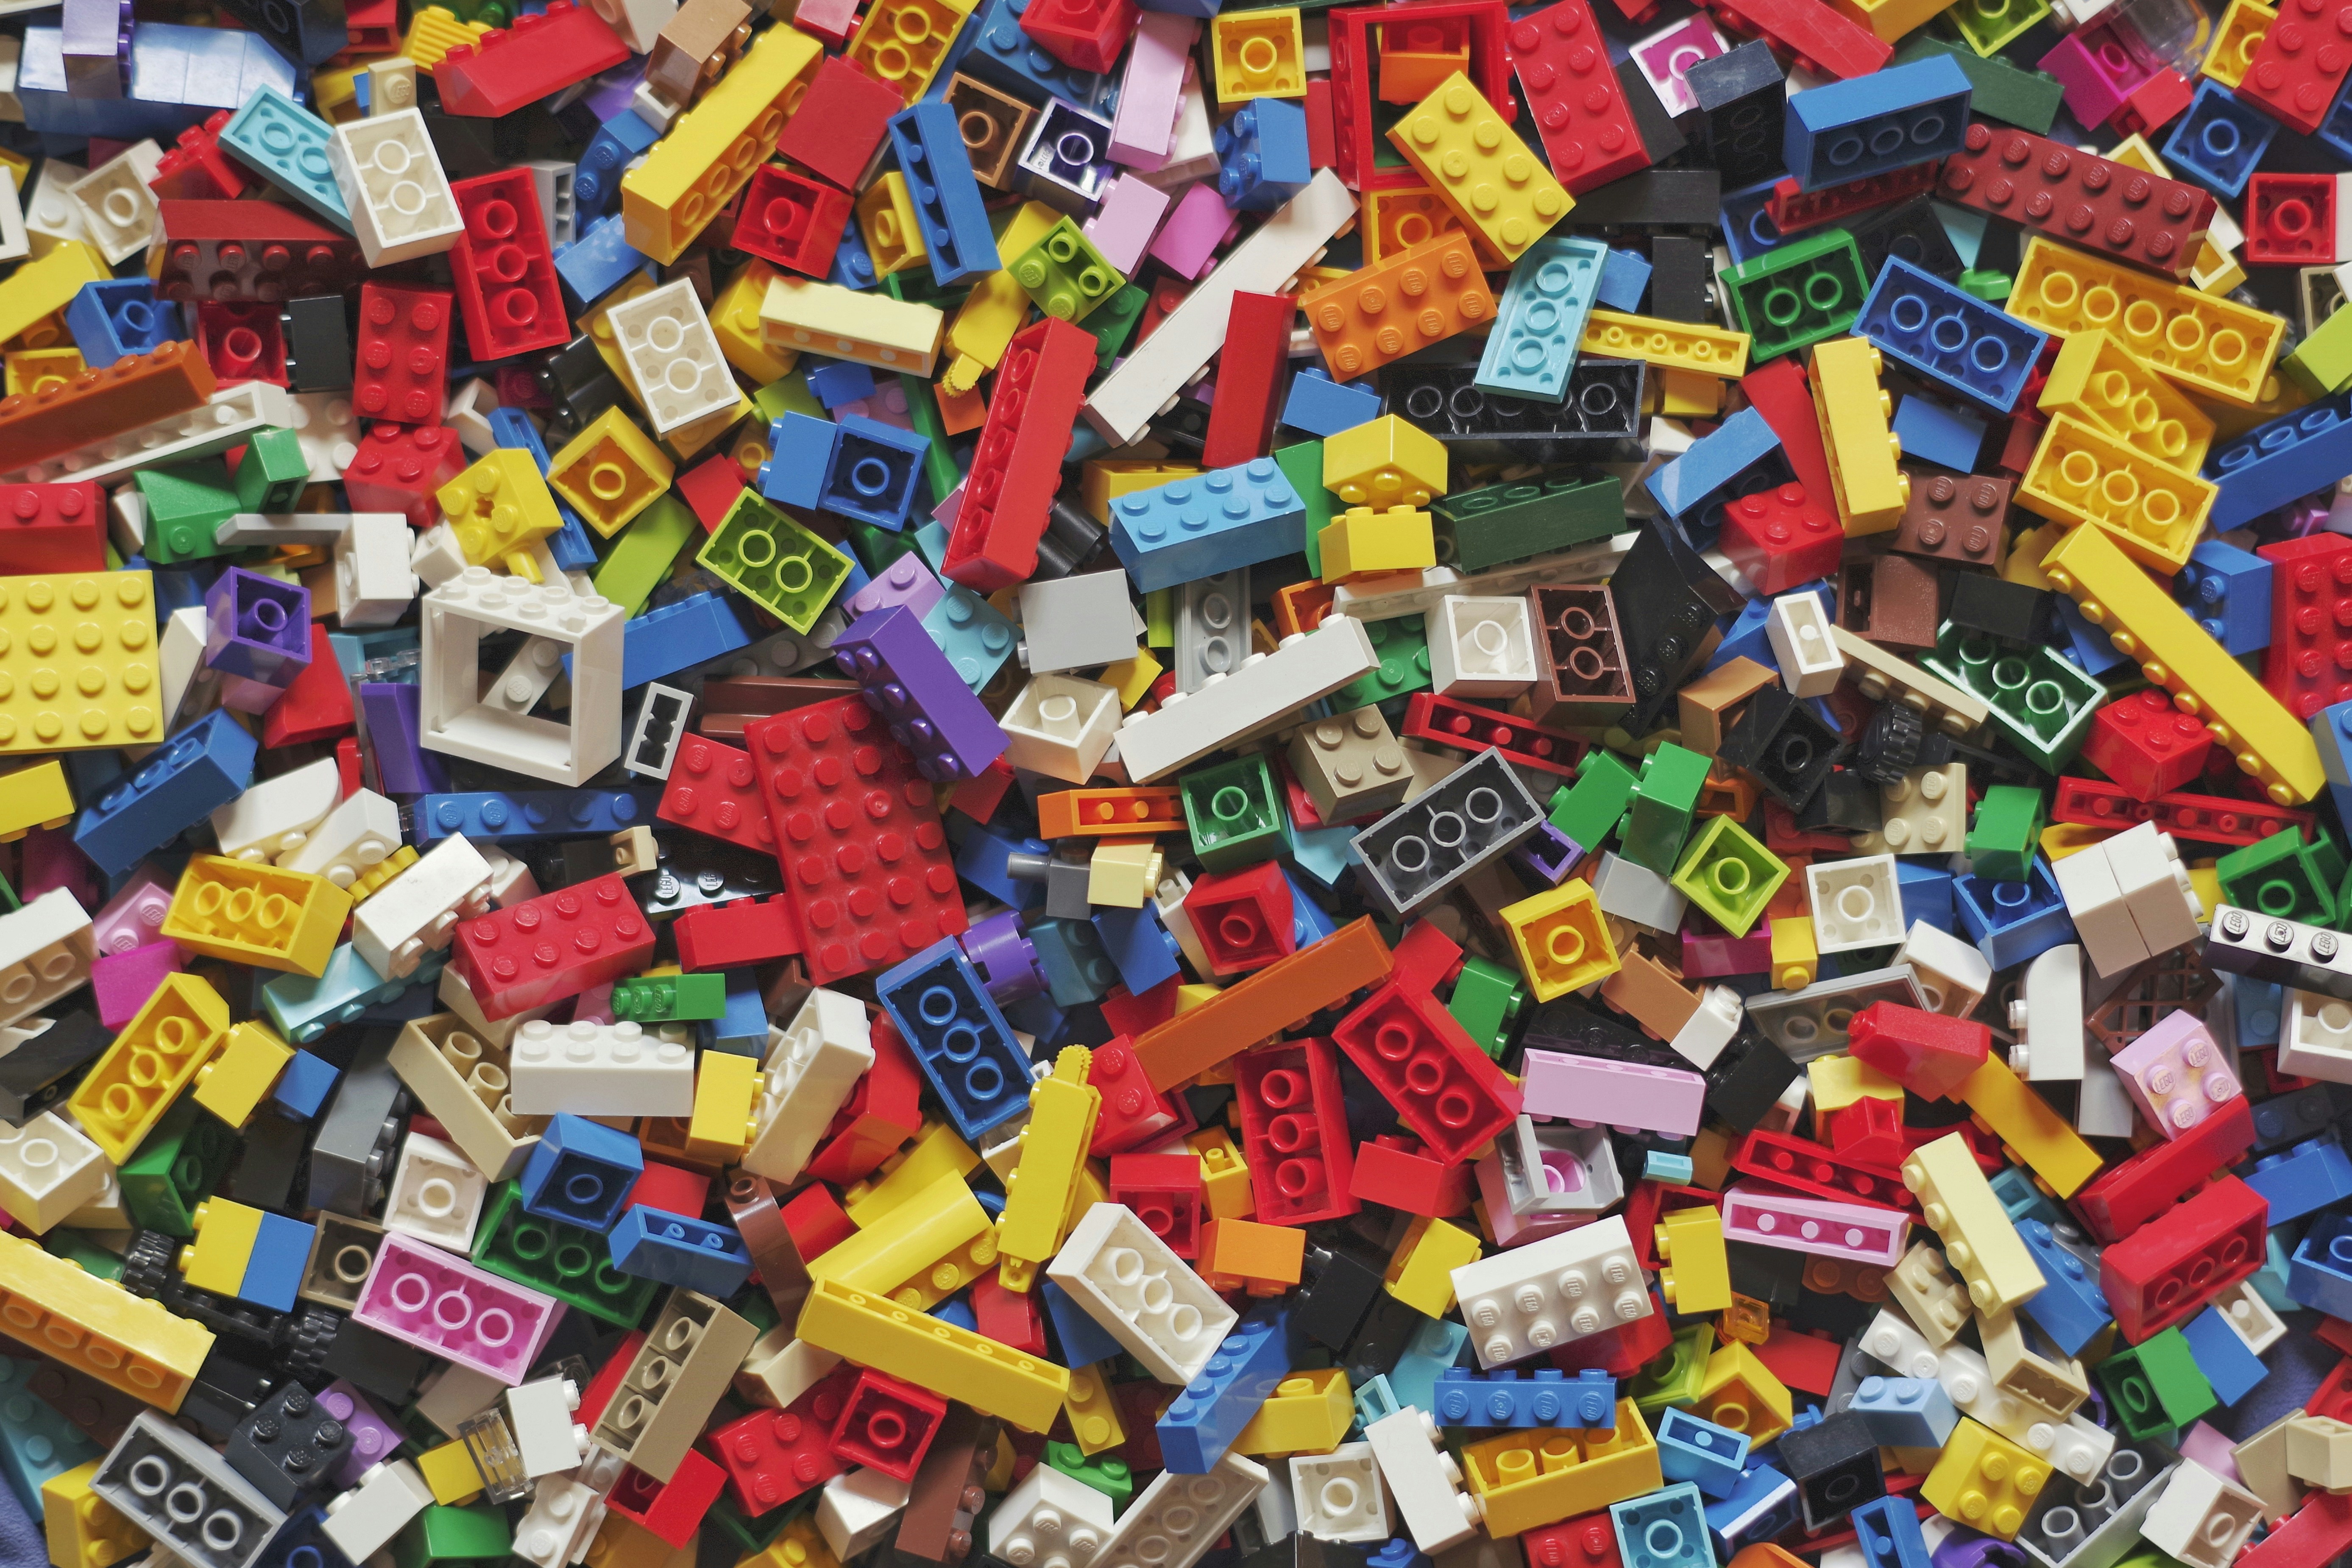 A pile of Legos